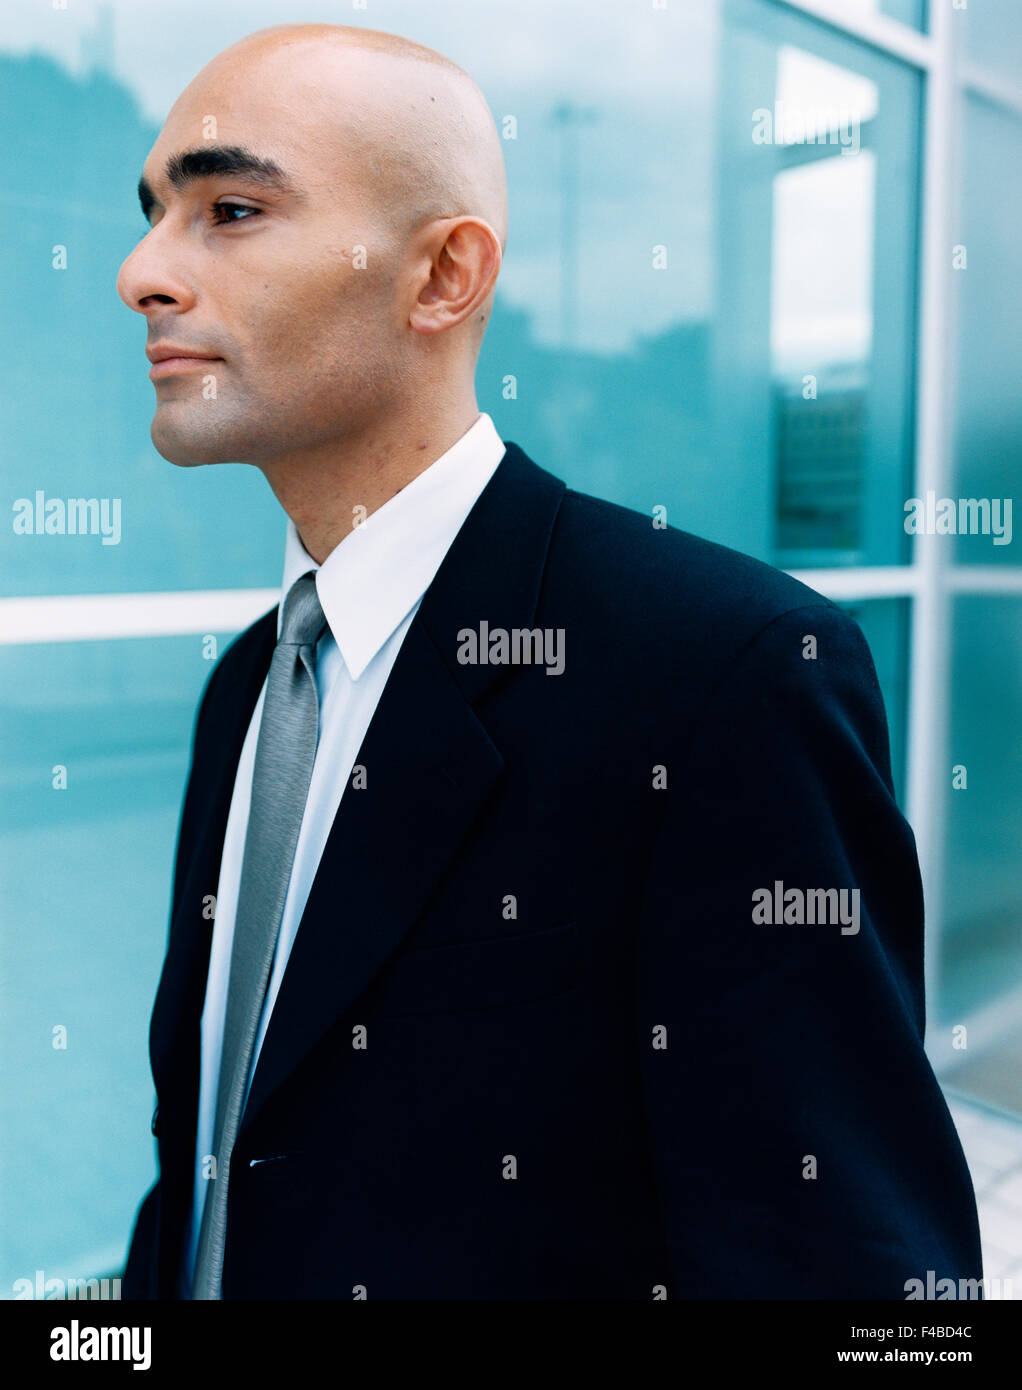 30-34 years adults only bald headed business businessman color image consultant dressed up hair-style man mid adult mid adult Stock Photo